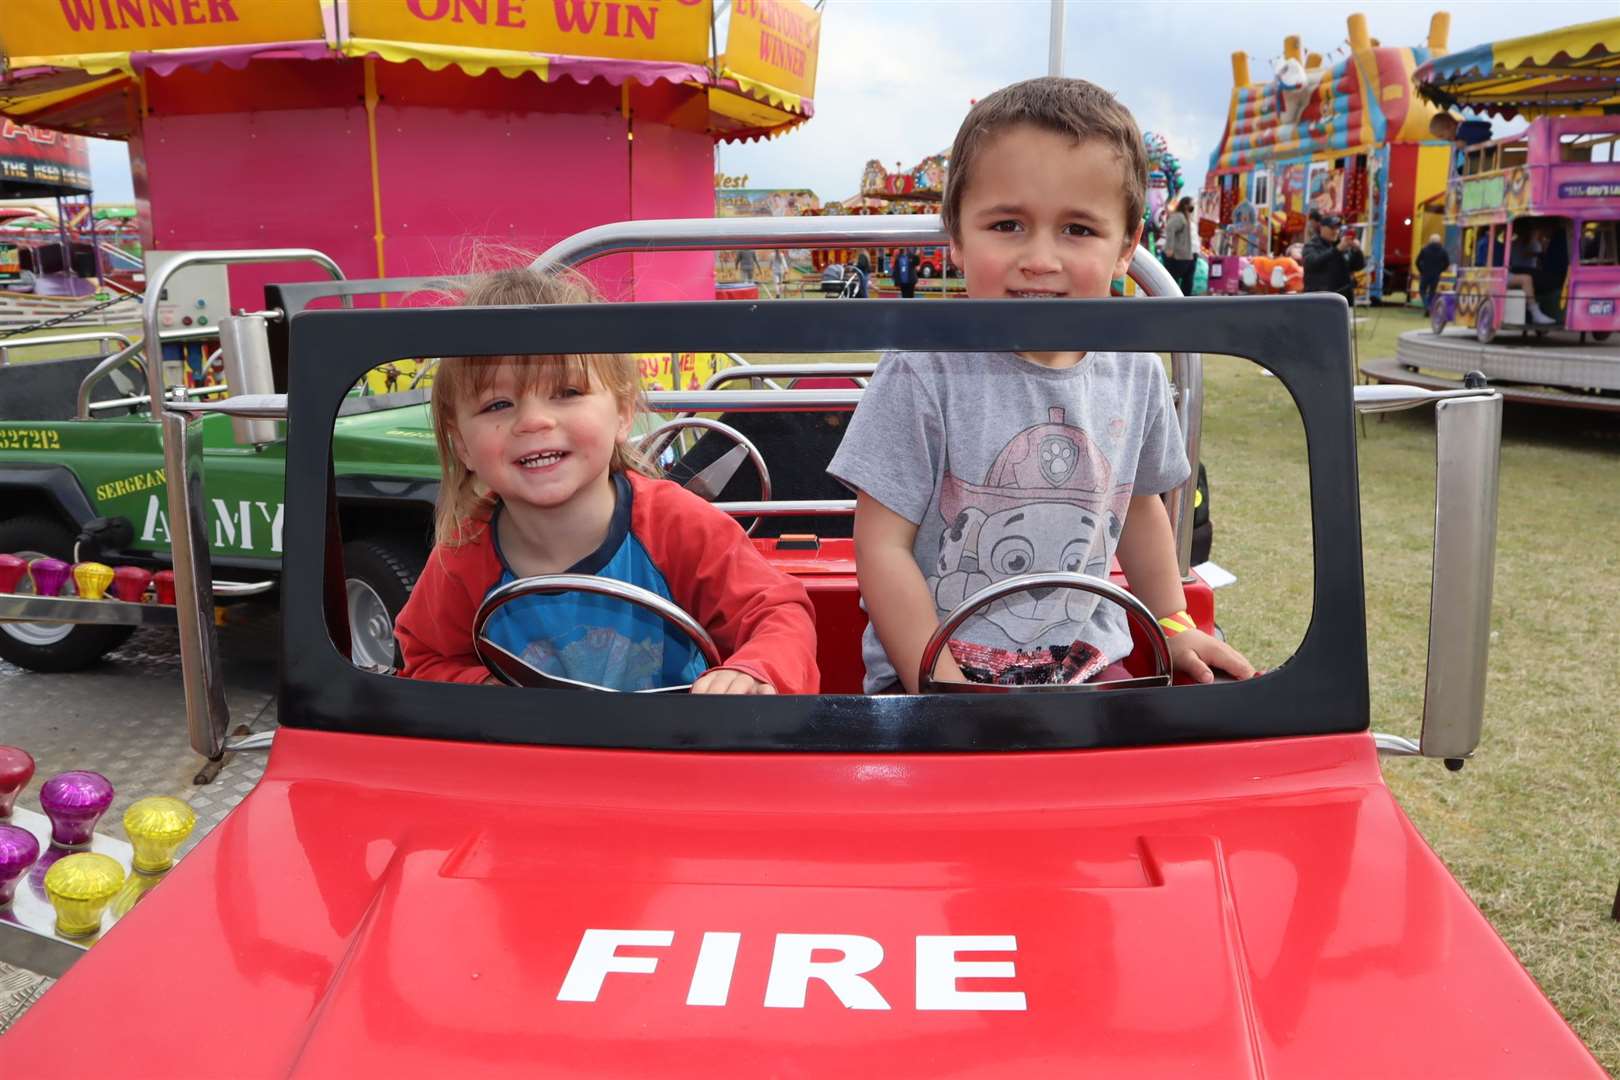 Charlotte Philcox, 2, and her brother Ralph, 4, rode the fire truck at Smith's funfair at Barton's Point, Sheerness